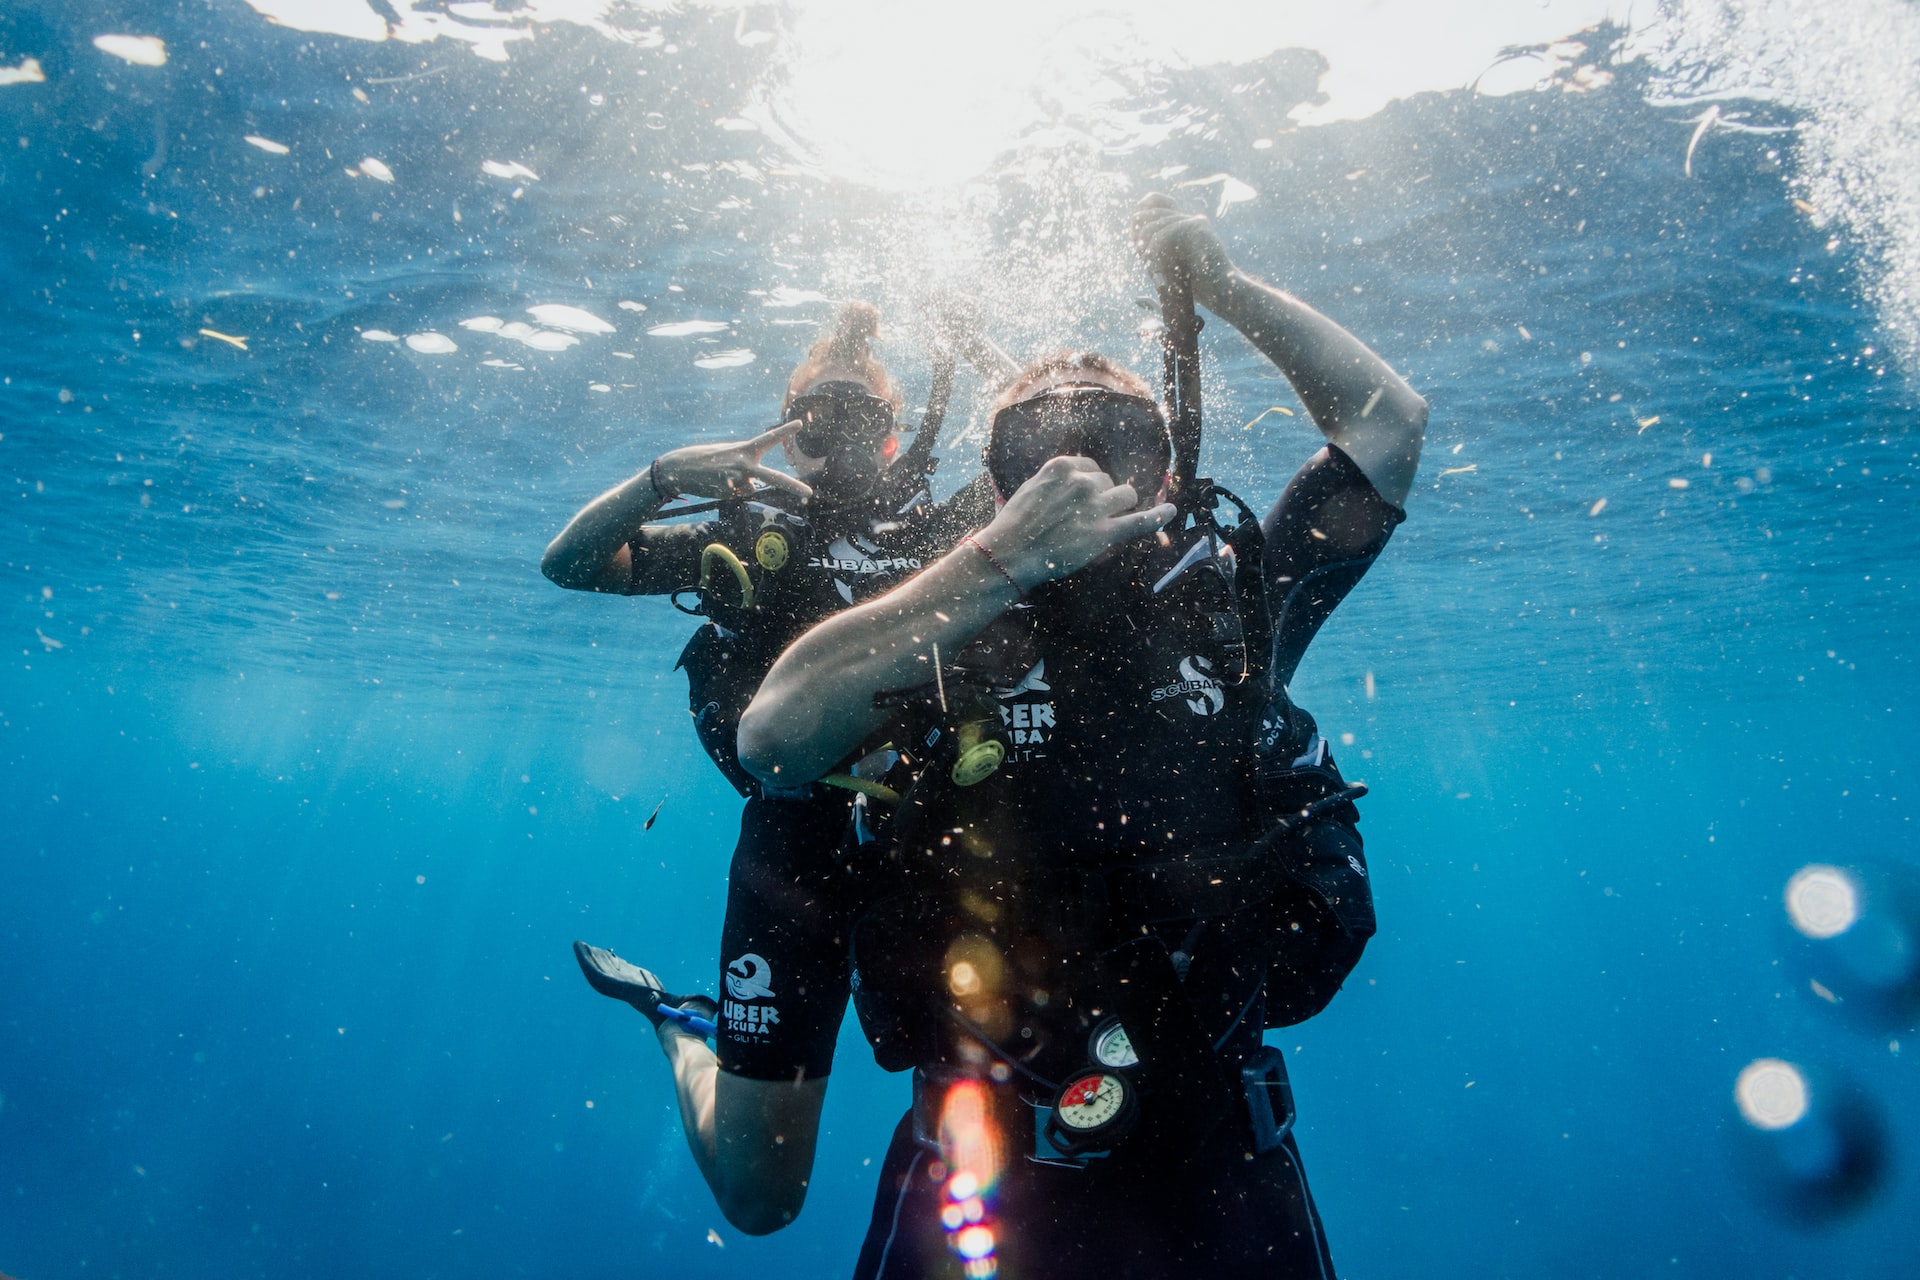 Two scuba divers in the water.